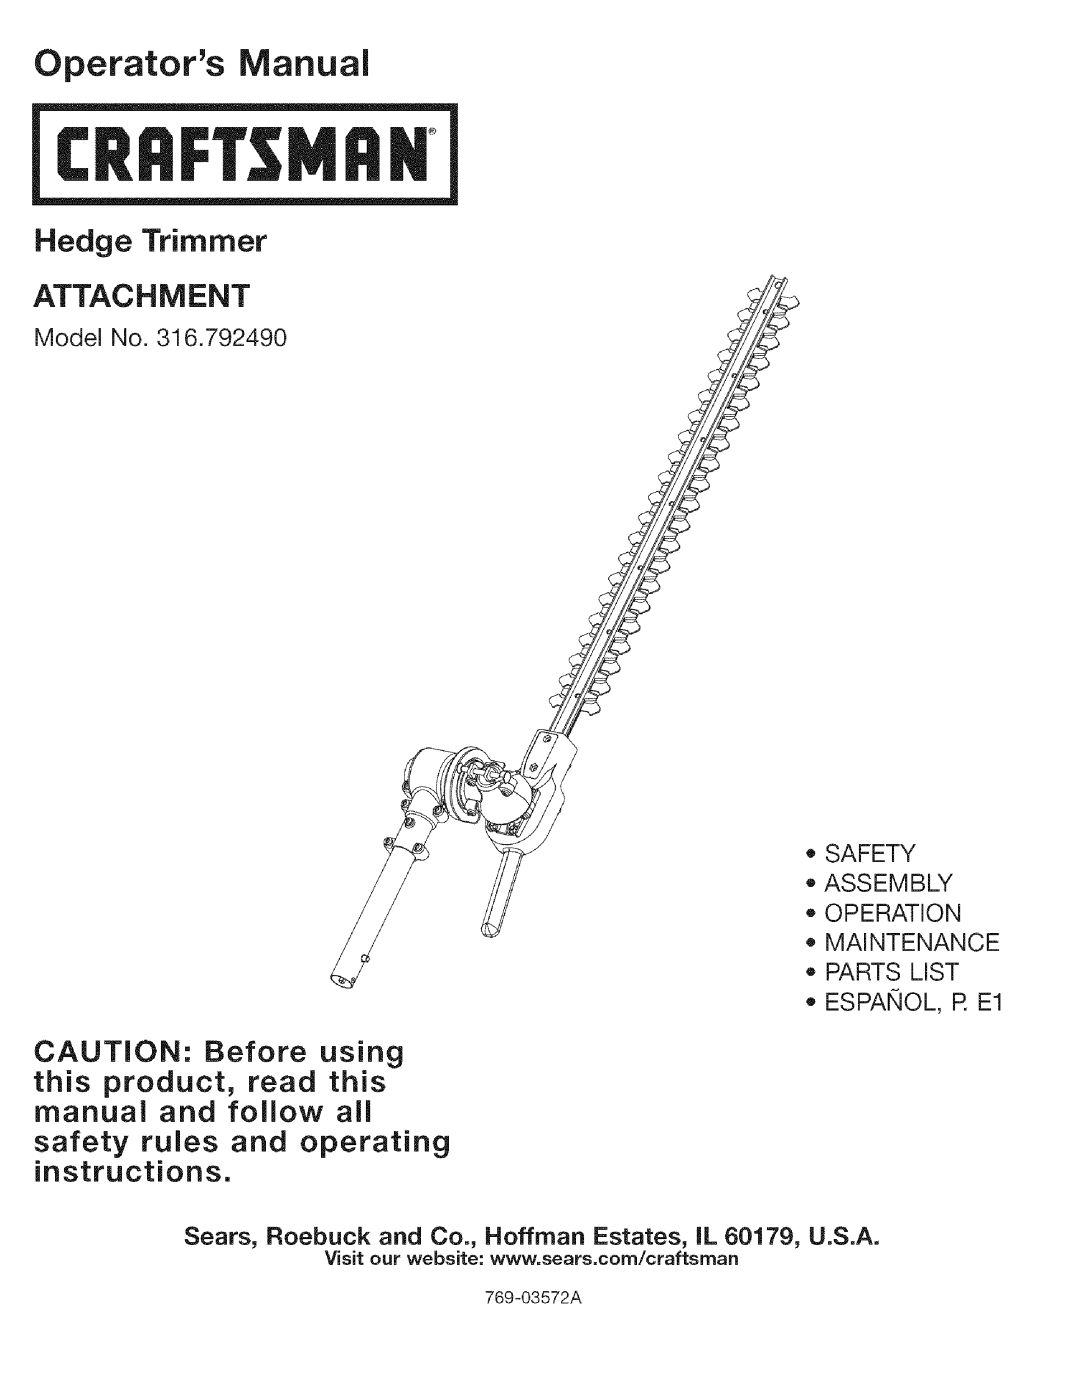 Craftsman 316.792490 manual Operators Manual, Hedge Trimmer, safety rules and operating instructions, Attachment, Model No 